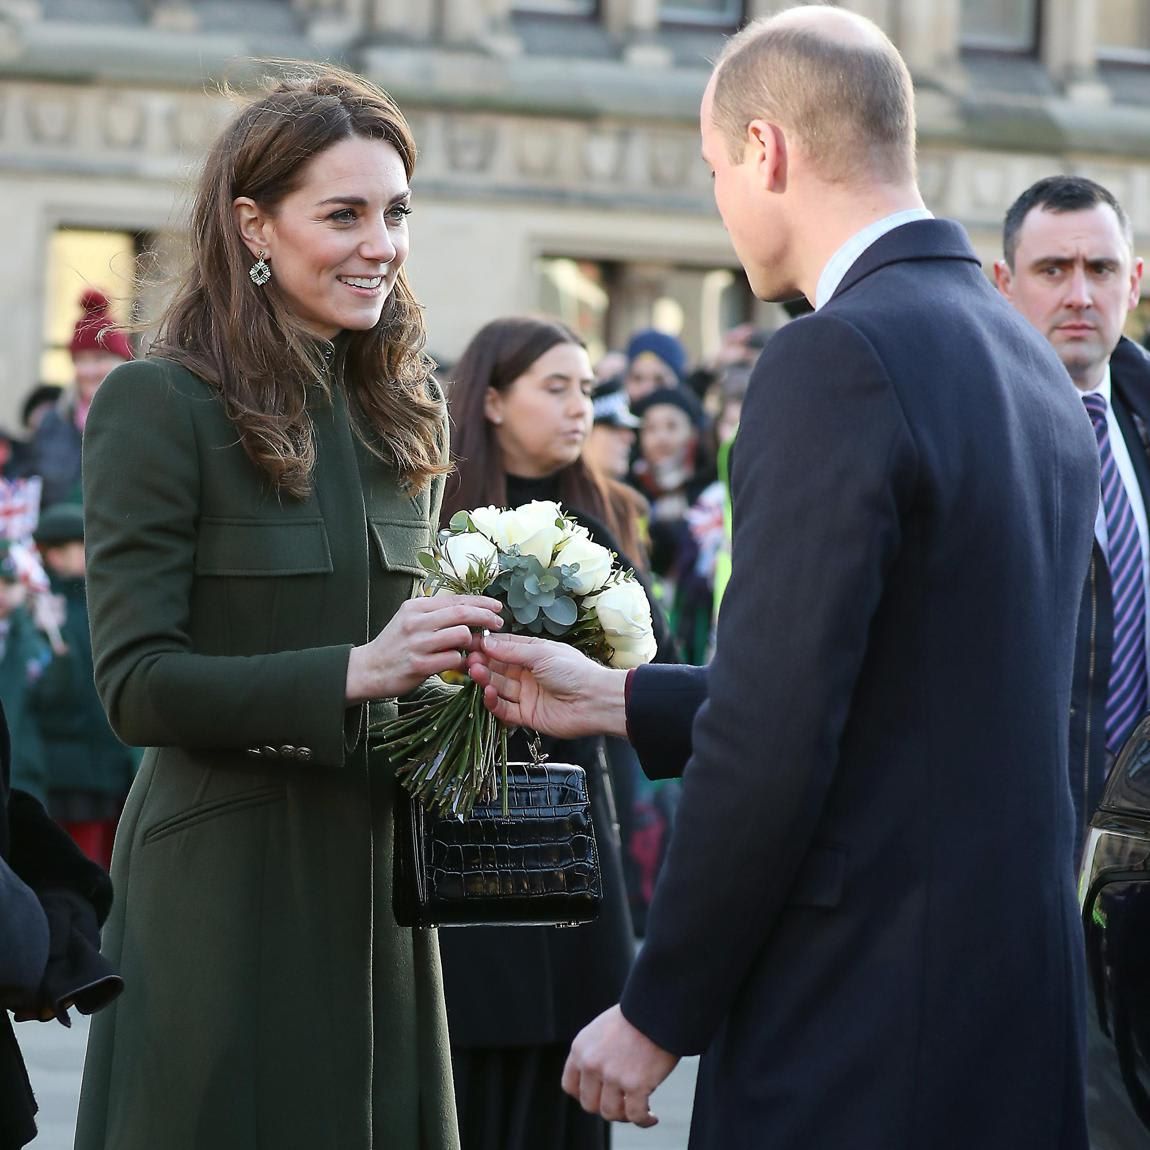 Prince William and Kate Middleton visited Bradford on January 15